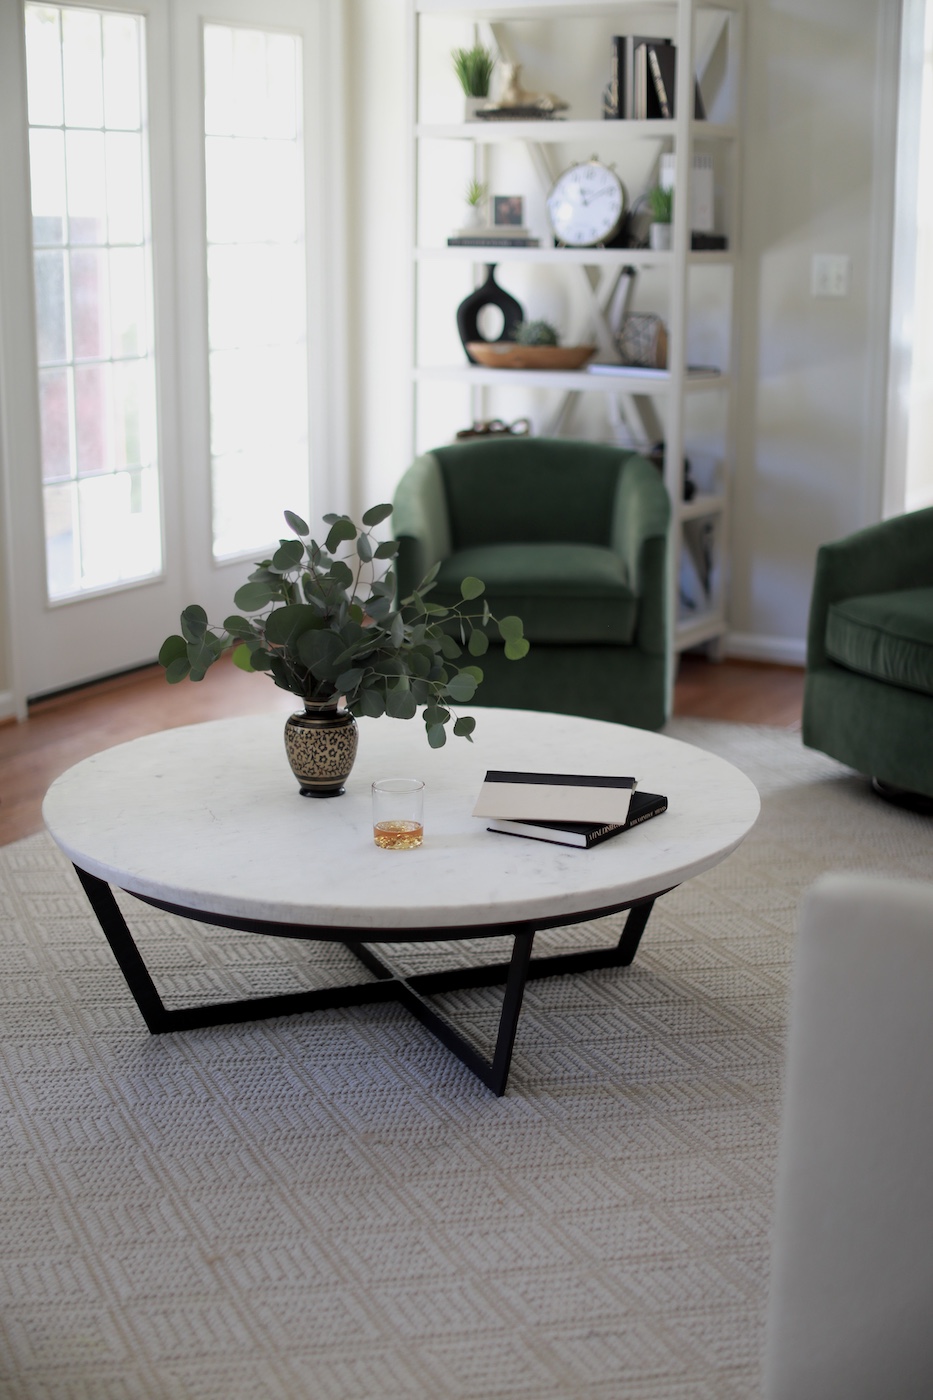 living-room-round-low-coffee-table-grambrills-md